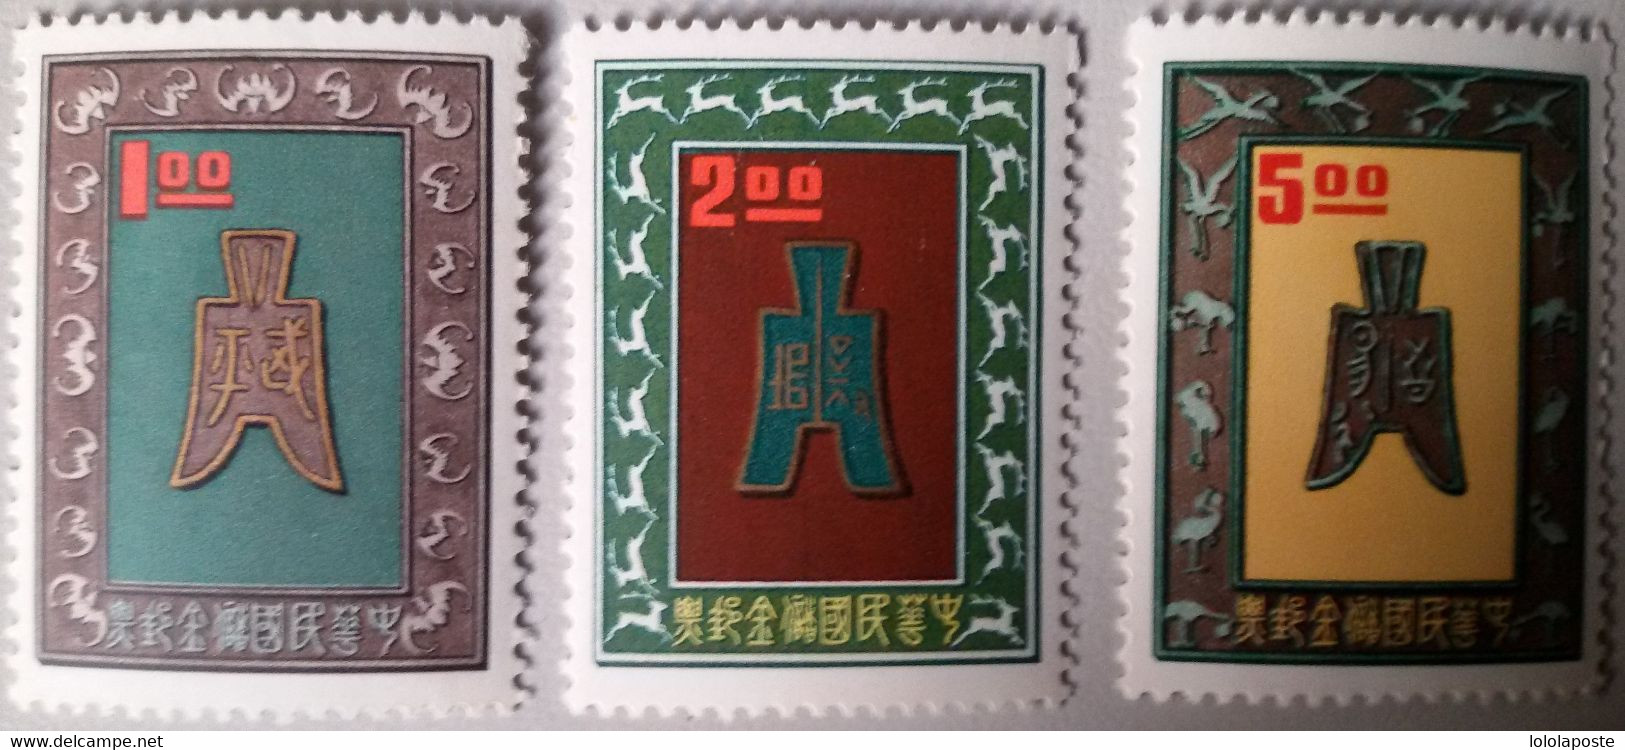 CHINE -CHINA -FORMOSE- SAVING STAMPS - Timbres D'épargne Postale - Y&T N° 1/3 -** (MNH) - 2 Photos - Ungebraucht